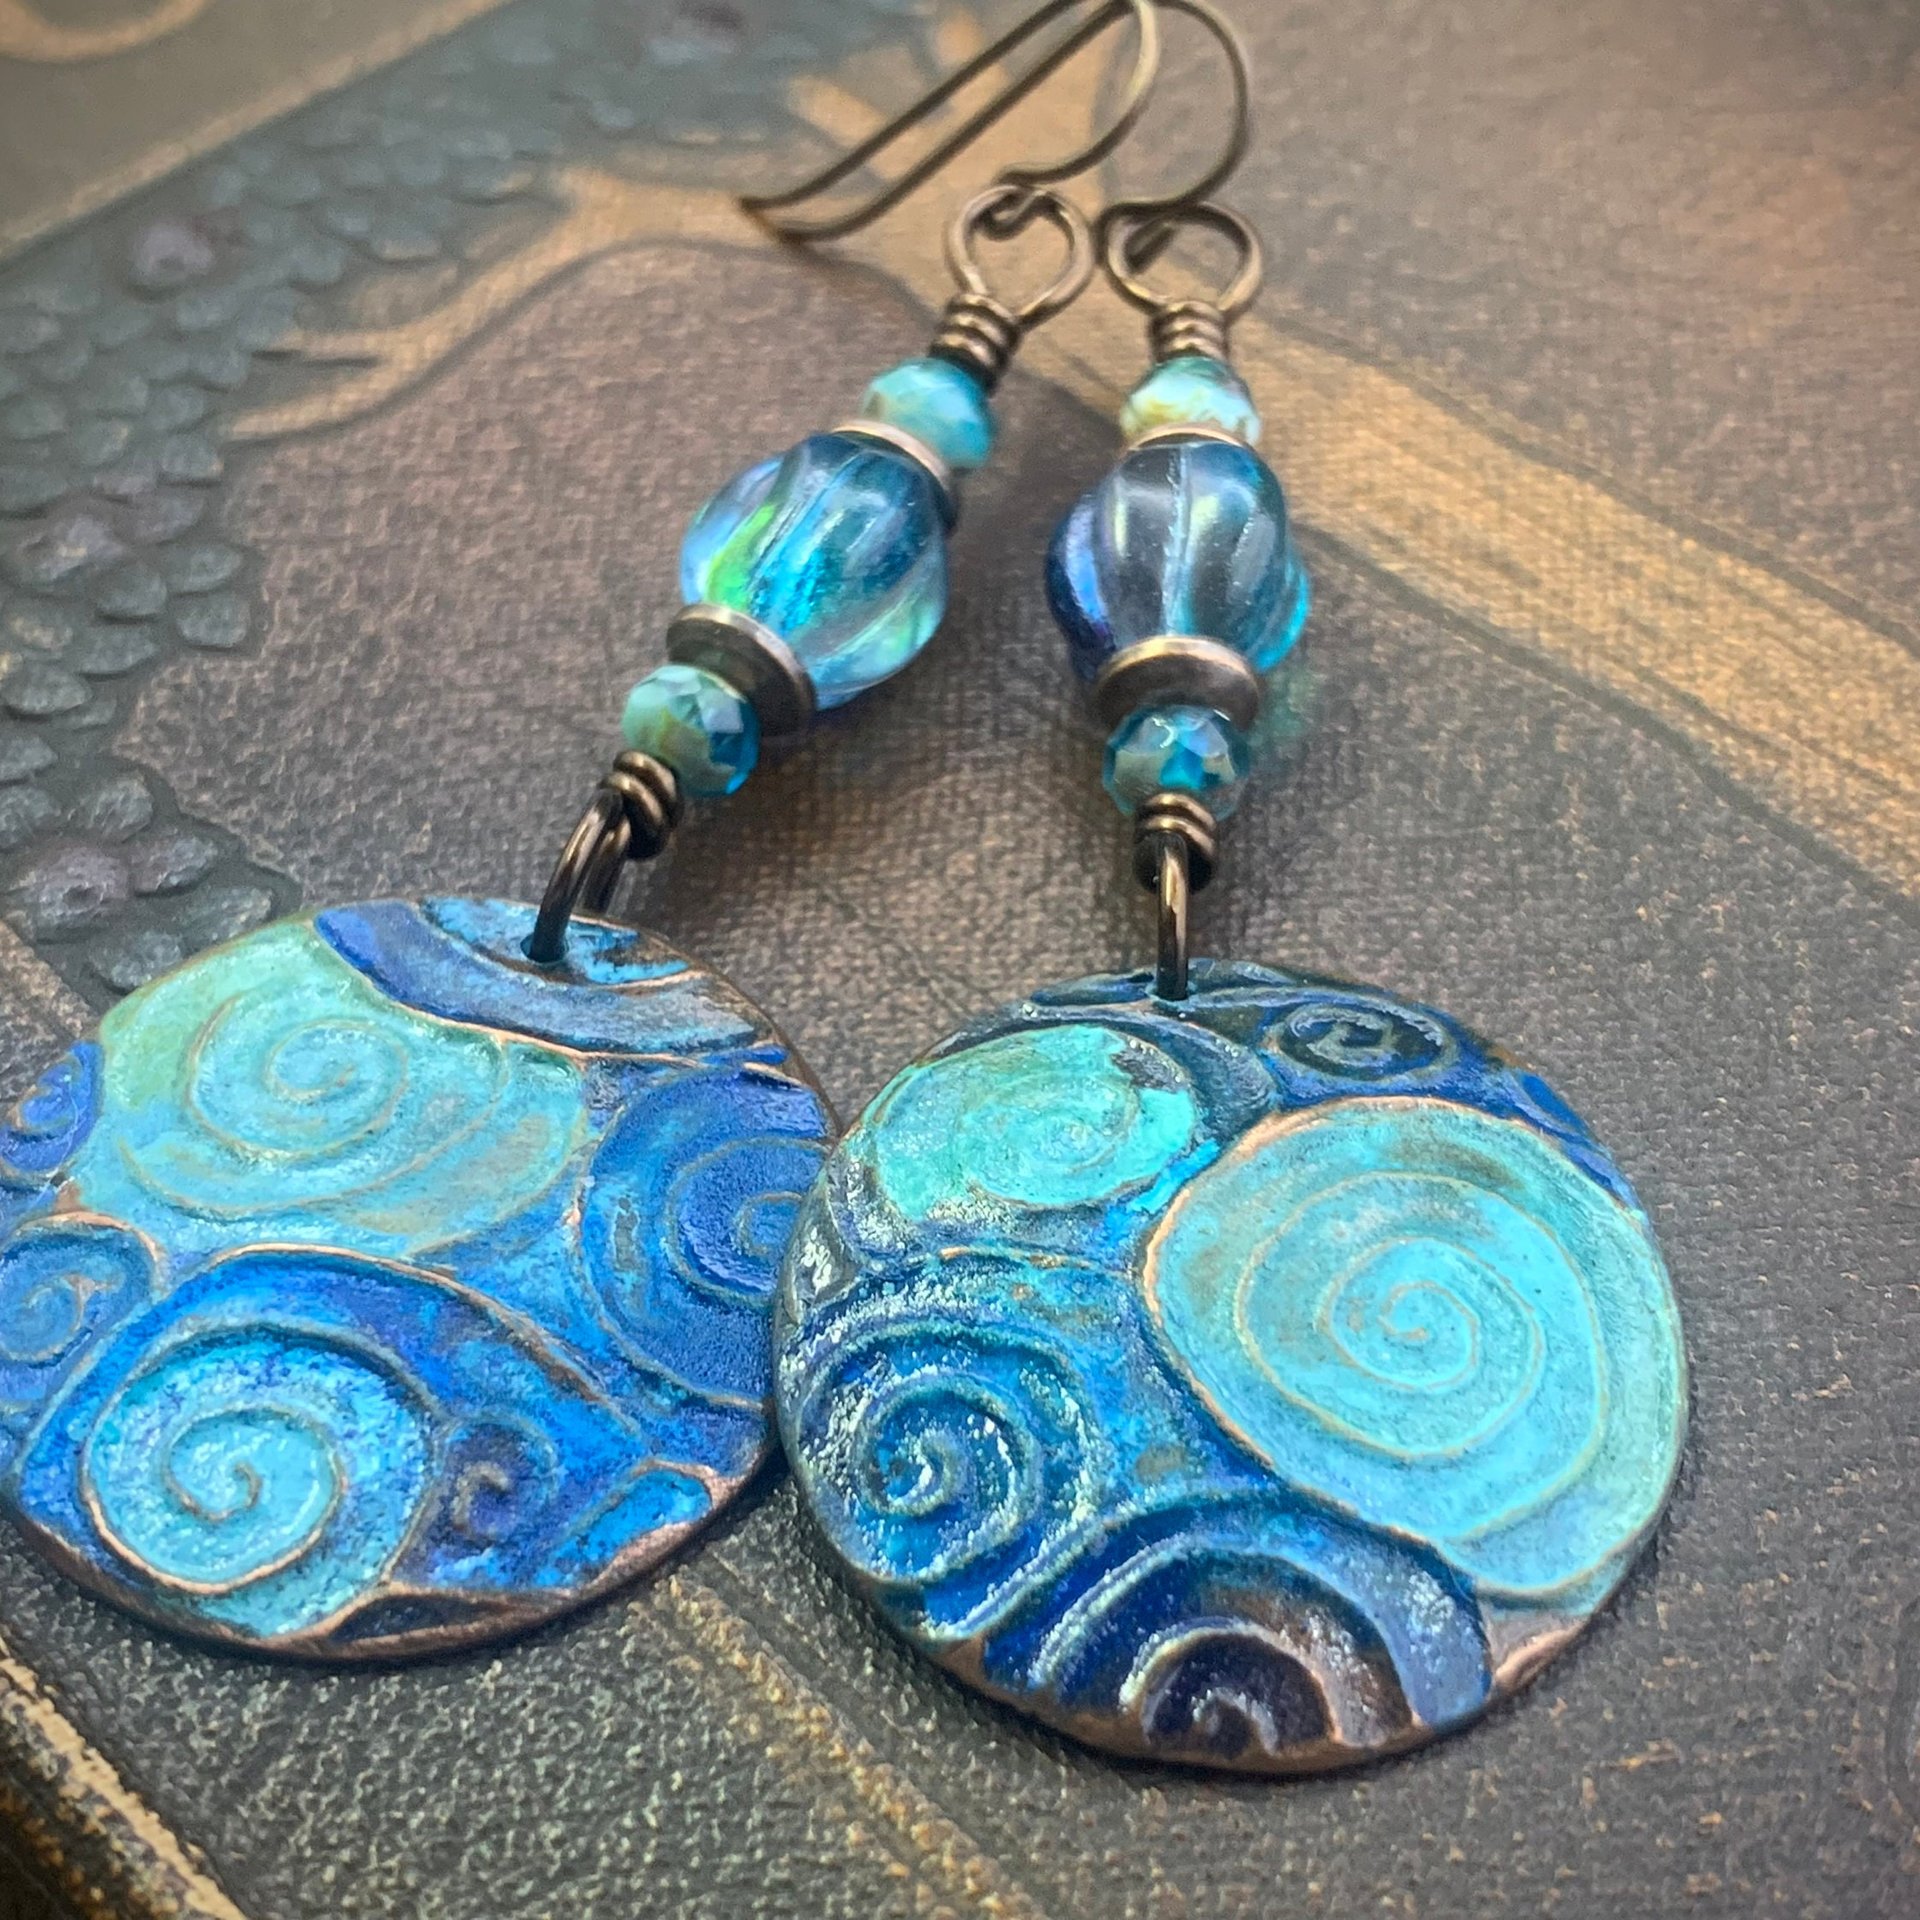 Copper Spiral Earrings, Verdigris Patina, Disc Earrings, Copper and Turquoise, Czech Glass Beads, Wire Wrapped, Irish Celtic Jewelry, Pagan